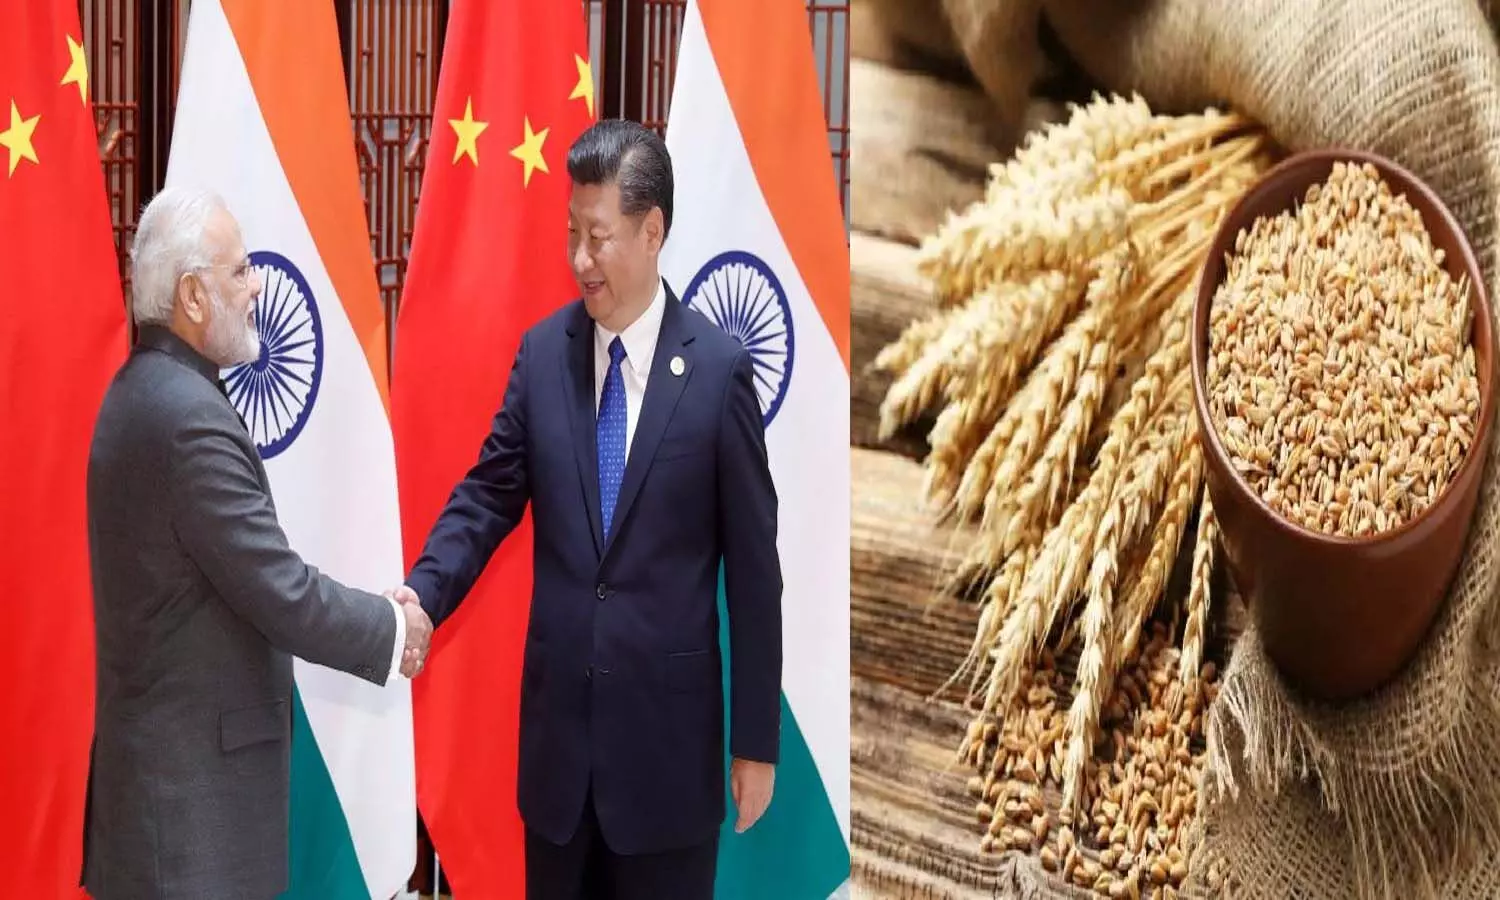 Export Of wheat China supports India on wheat export ban issue, says G7 should go ahead